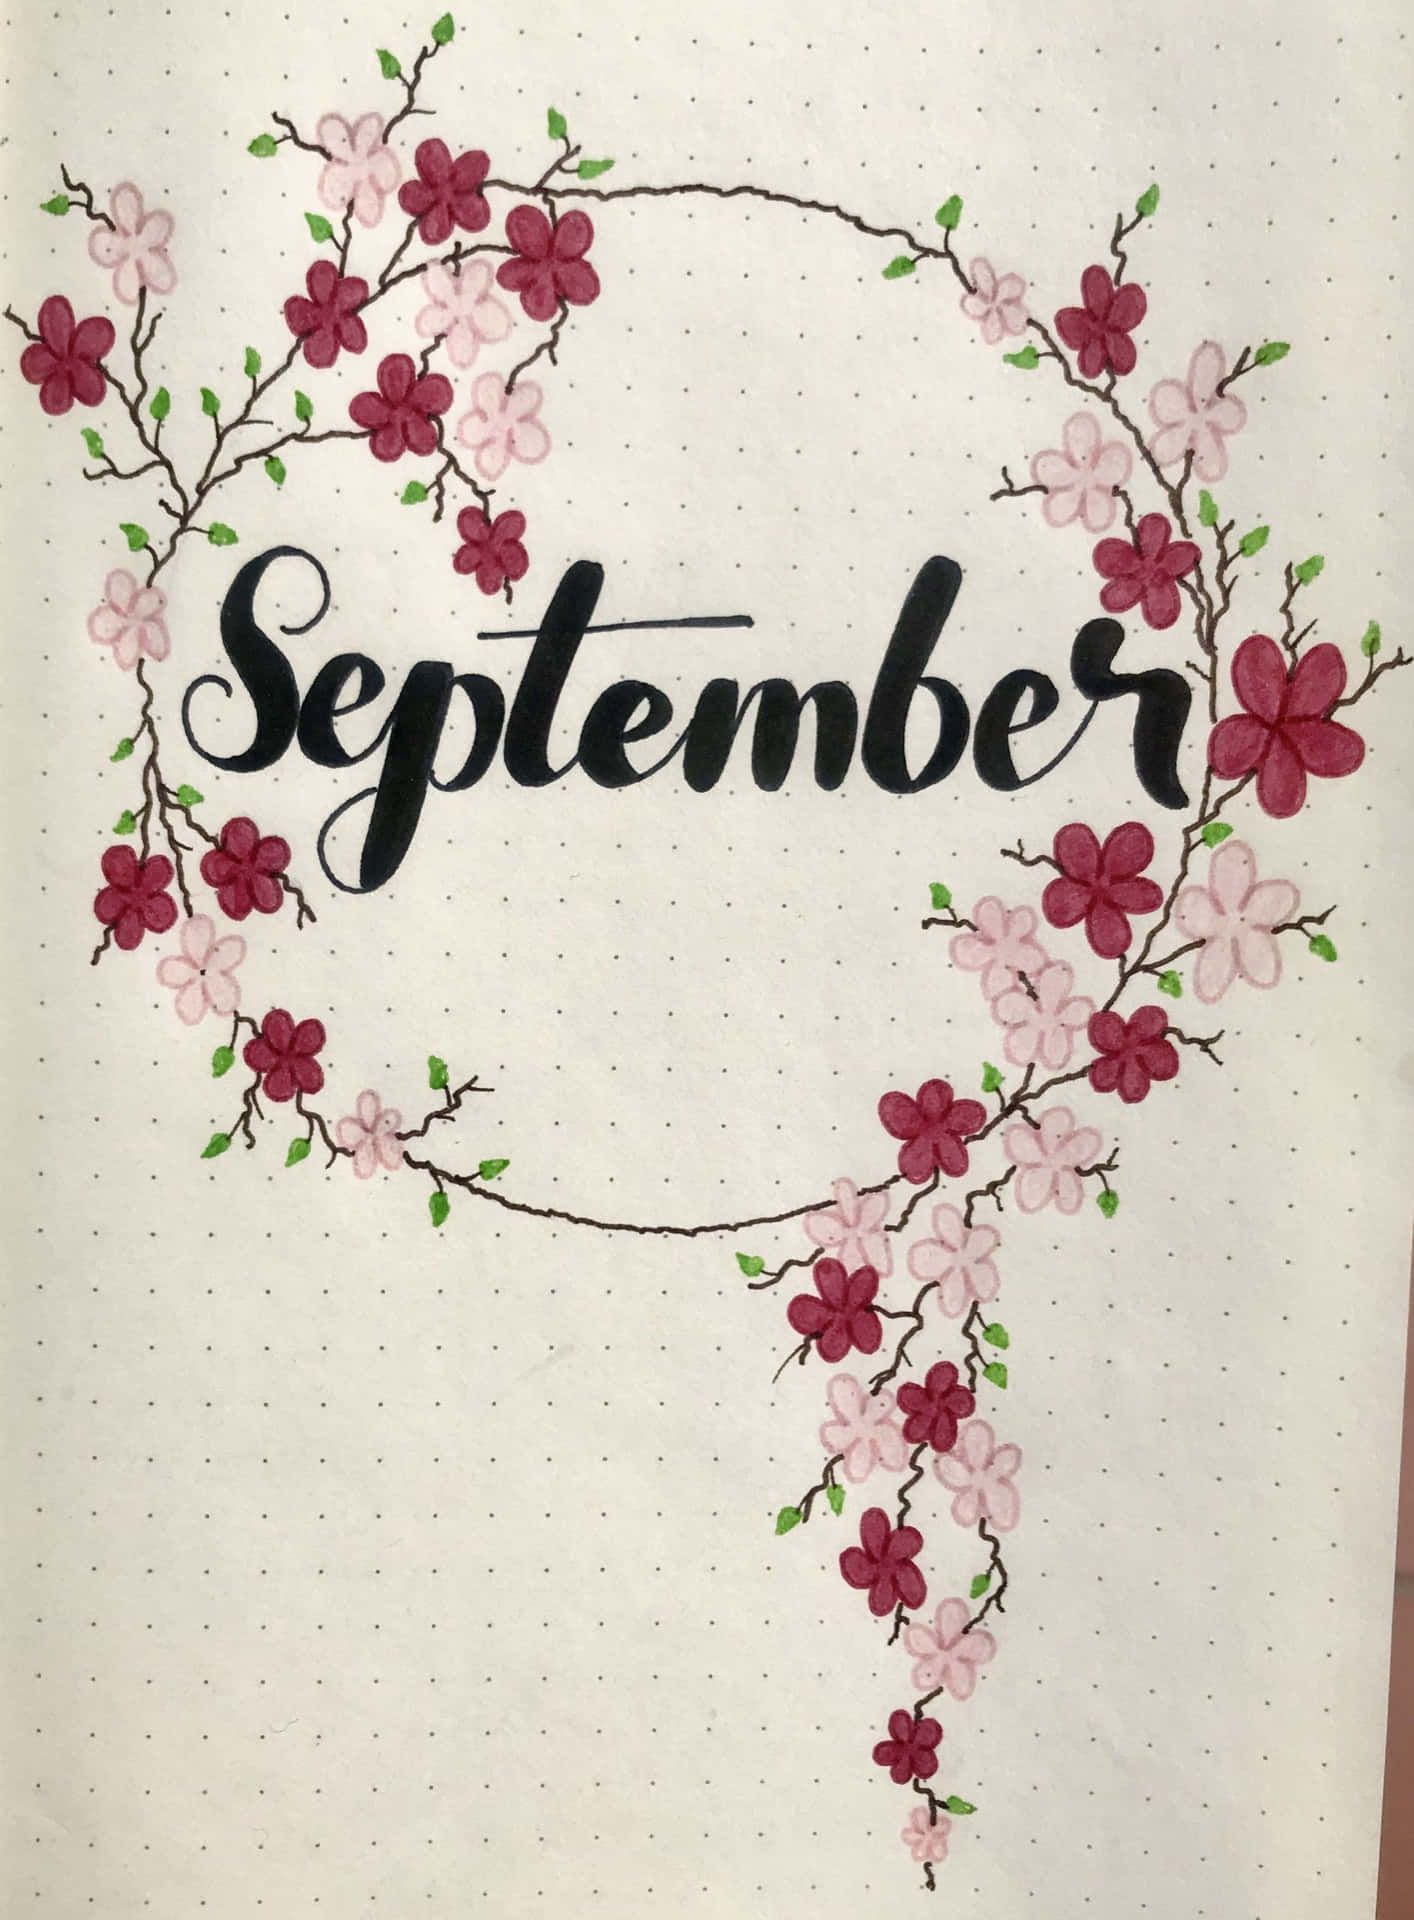 Say goodbye to the warmth of August and welcome the newness of September.